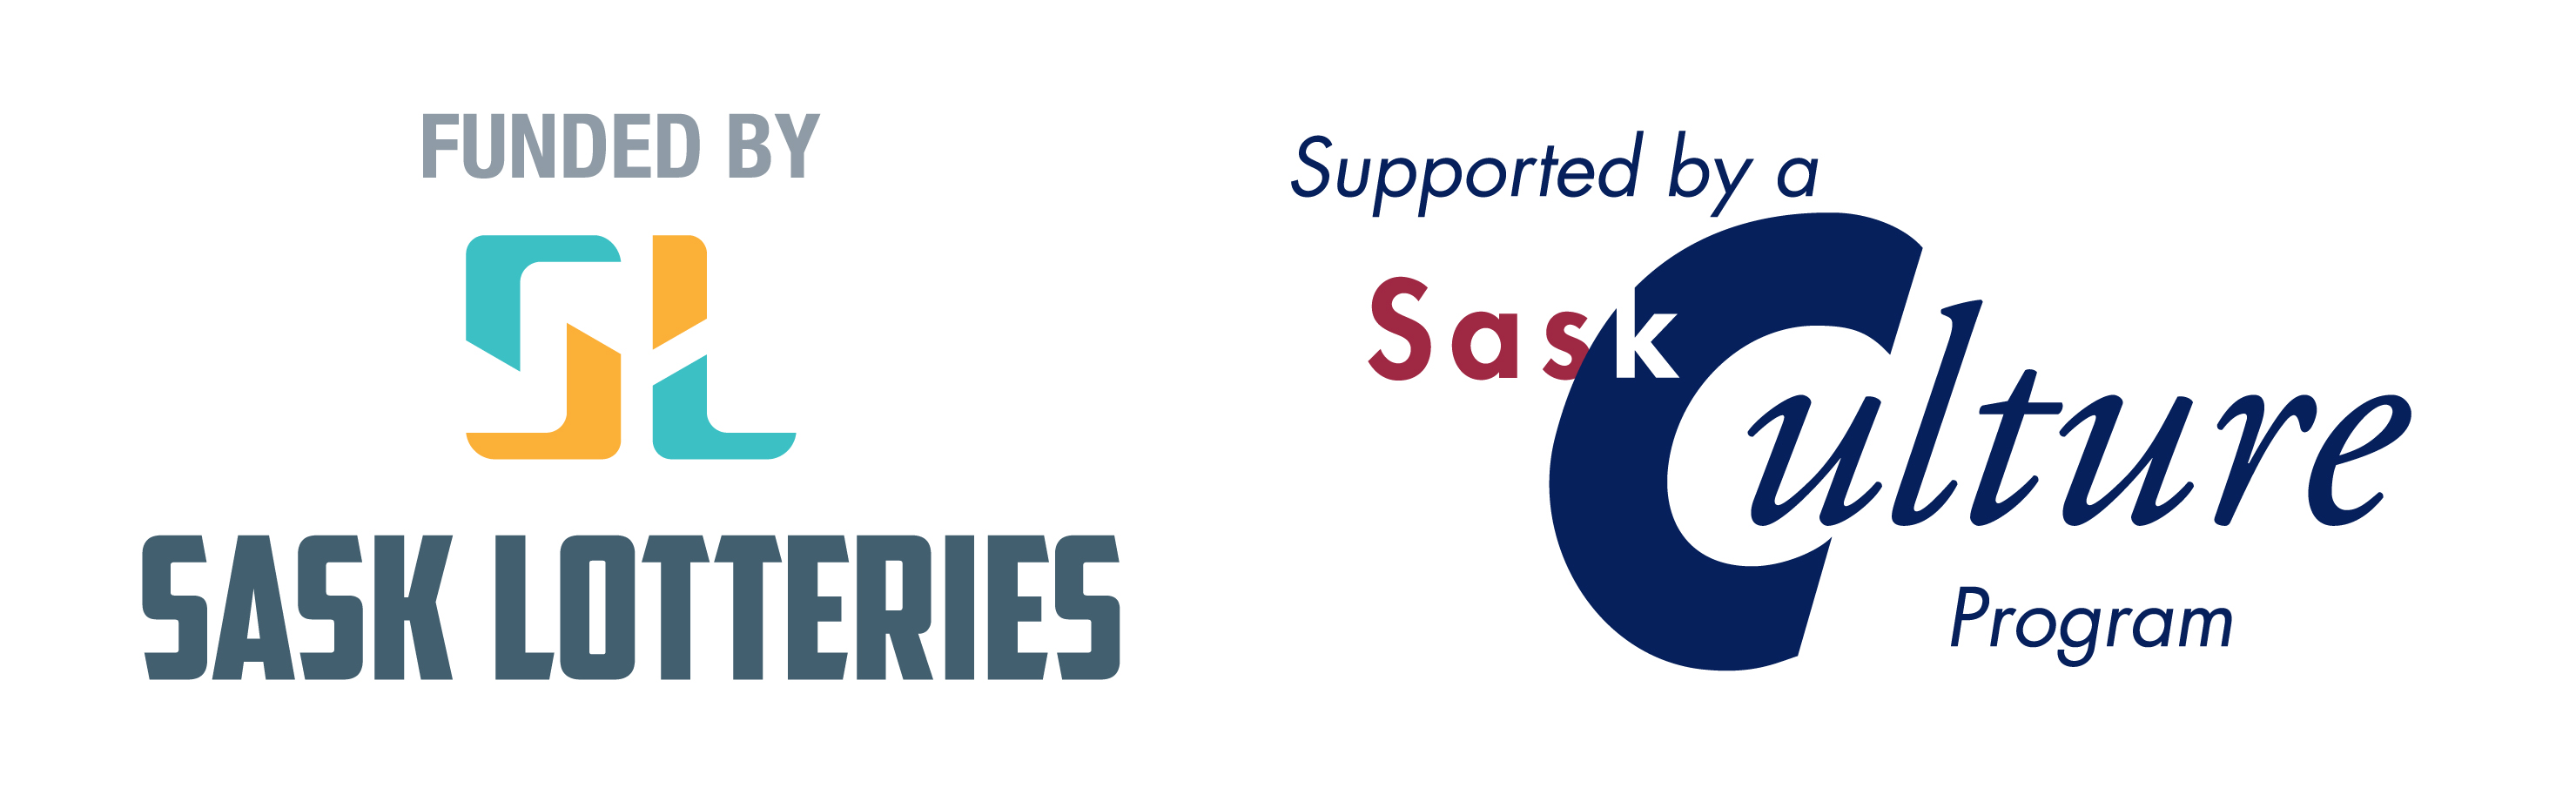 Funded by Sask Lotteries, Supported by a SaskCulture program logo